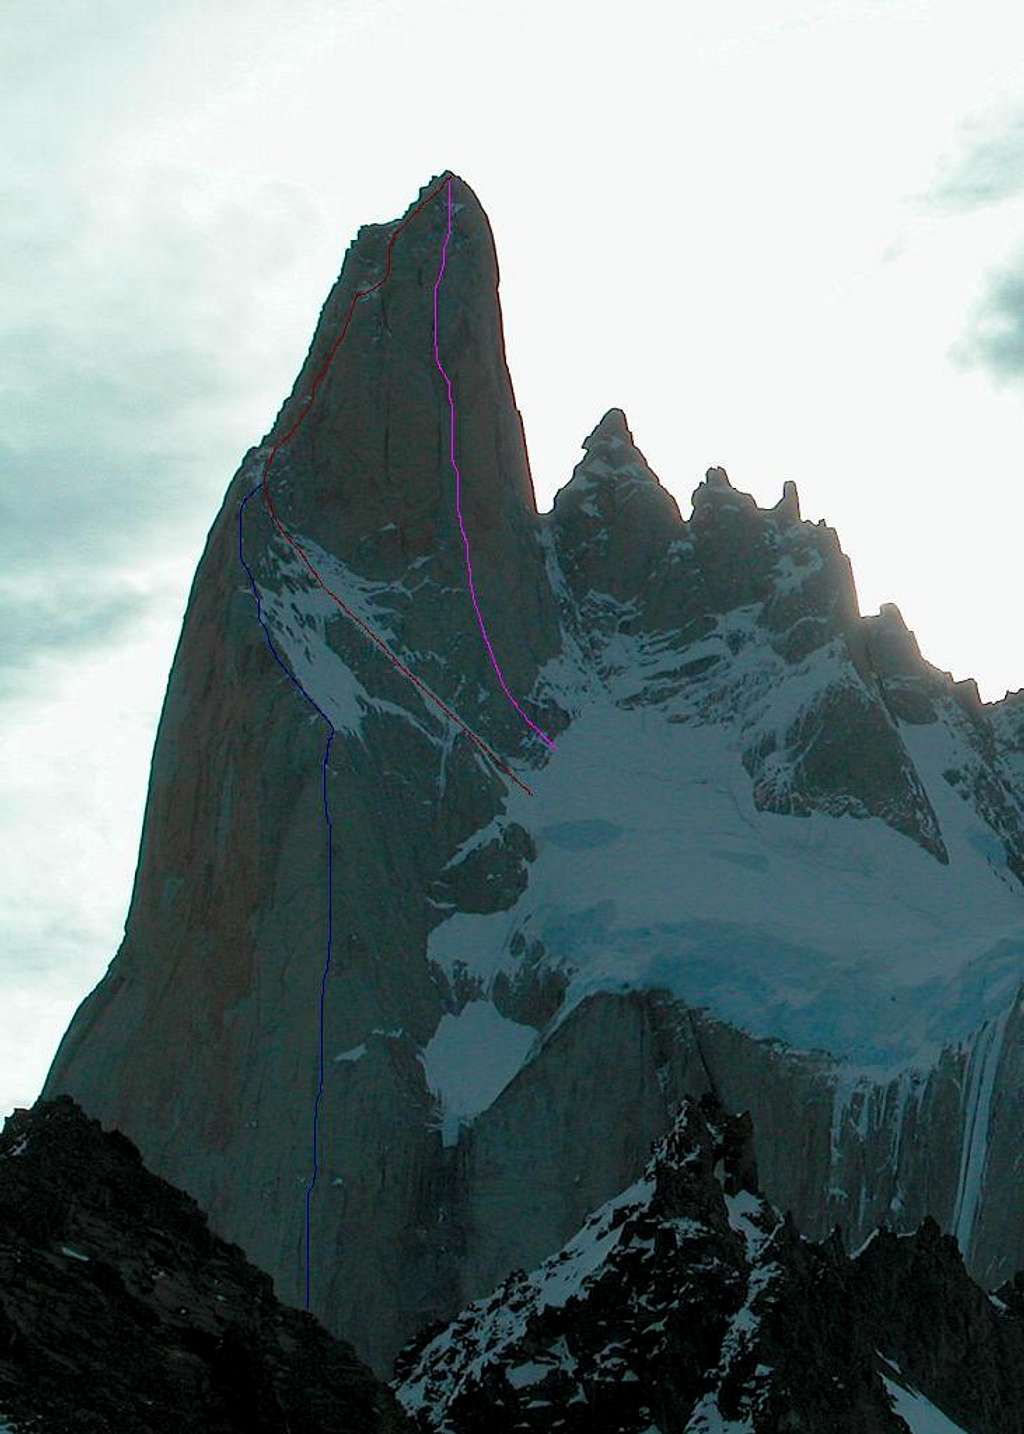 Aguja Poincenot (3002m - routes on East face)